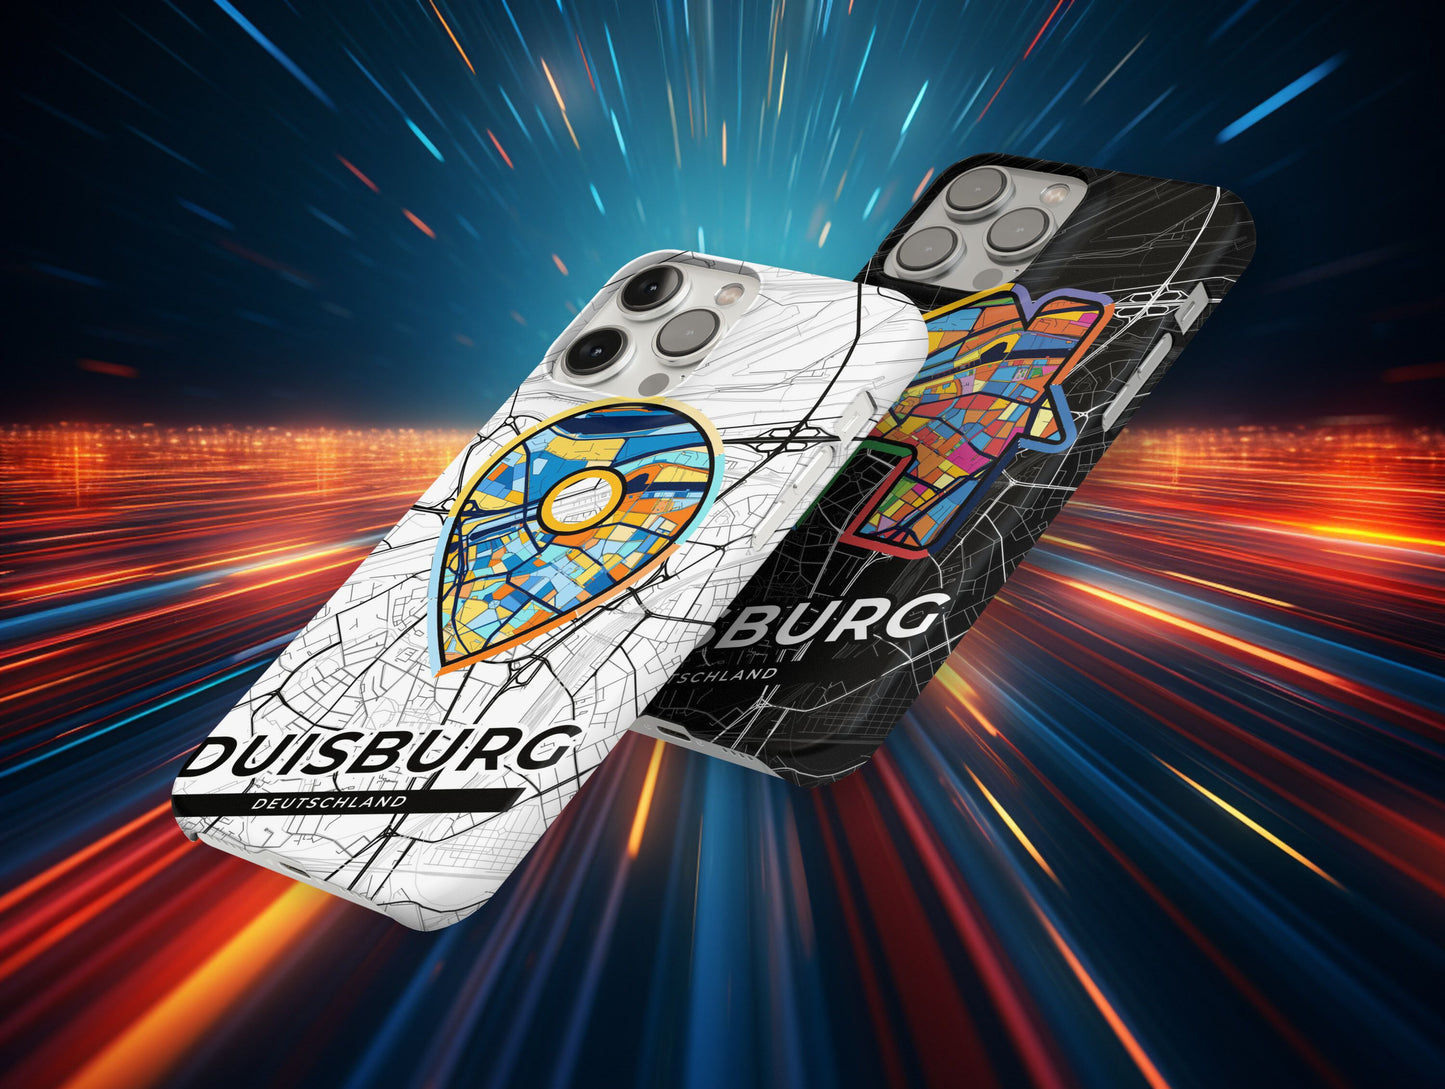 Duisburg Deutschland slim phone case with colorful icon. Birthday, wedding or housewarming gift. Couple match cases.